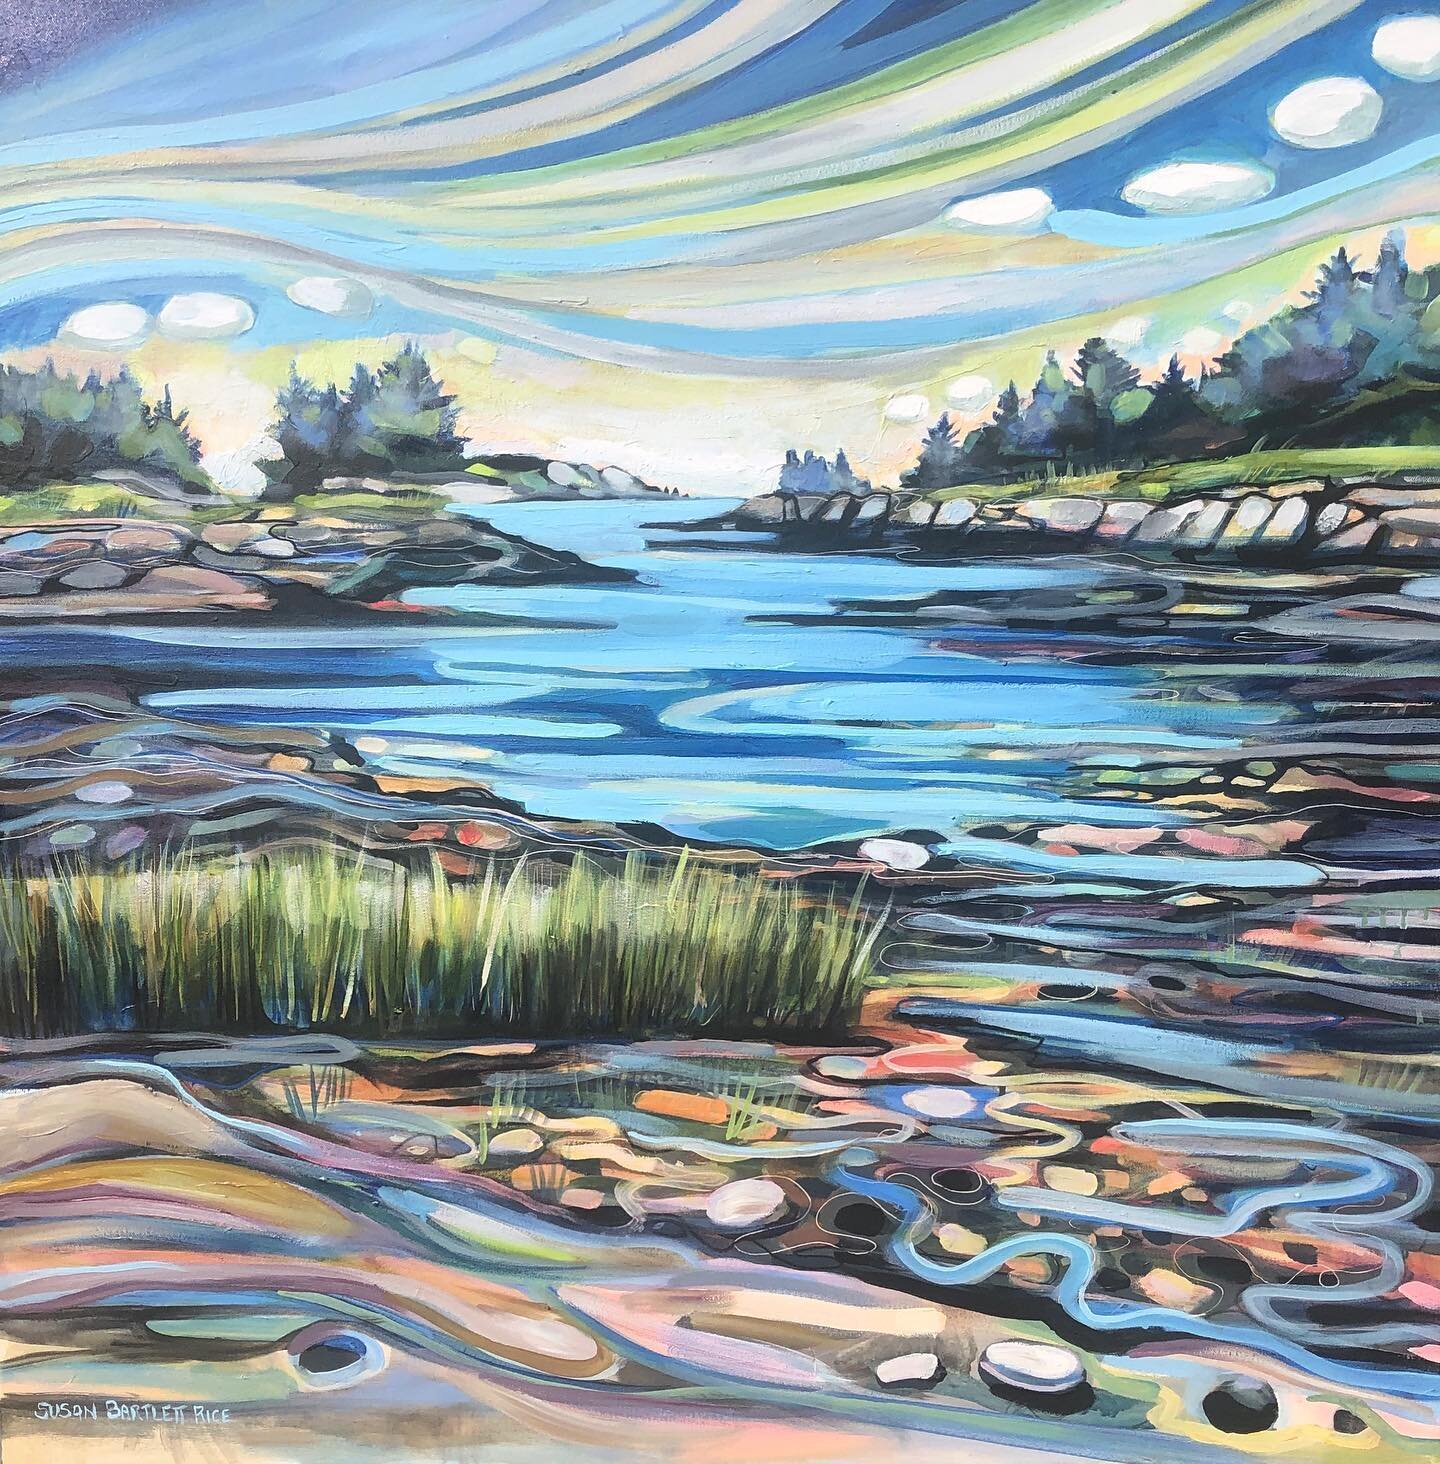 This painting came from a sketchbook full of ideas from time spent in Georgetown. I&rsquo;m so glad it found a home exactly where it belongs. 

Susan Bartlett Rice
&ldquo;Big Tide Joy&rdquo;
36x36
SOLD
.
.
#Artist #Maine #Maineartist #mainelife #main